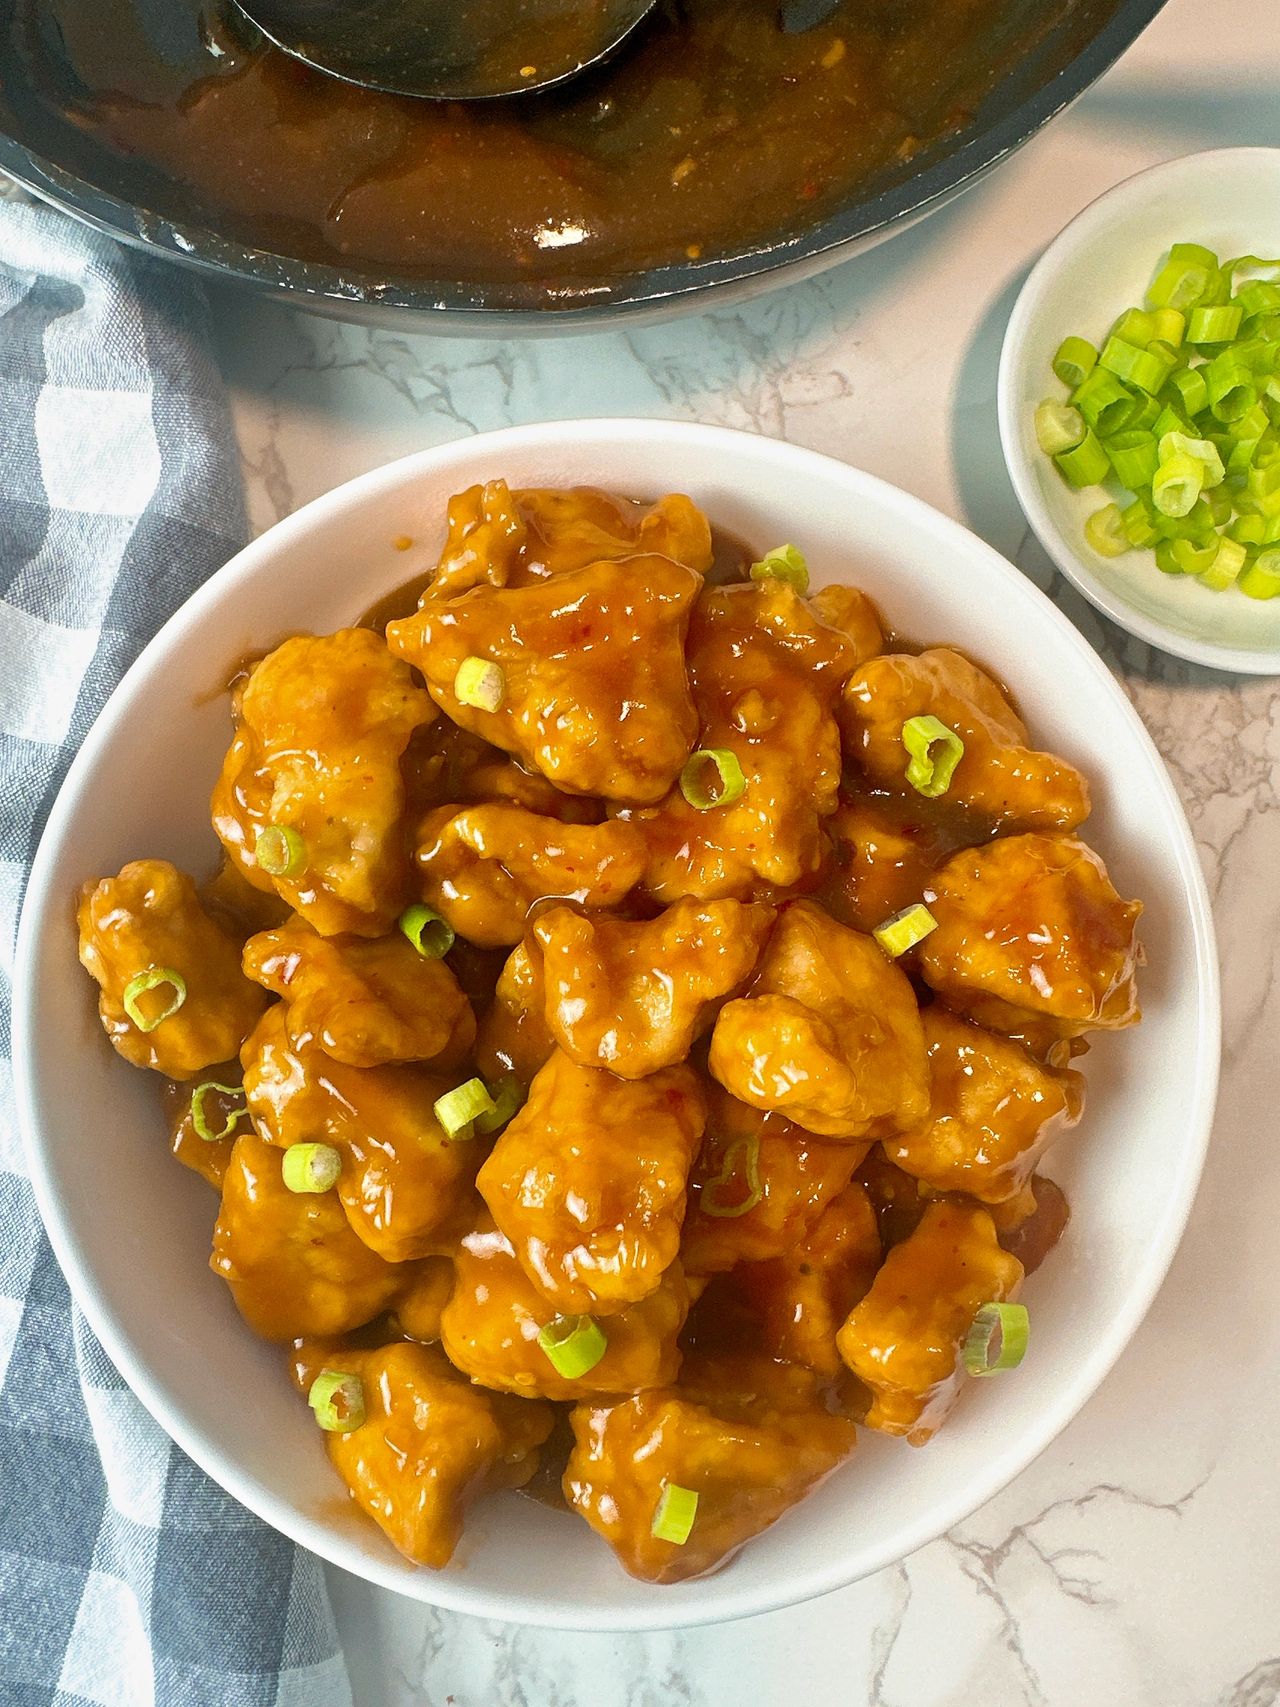 Orange Chicken That's Better Than Takeout